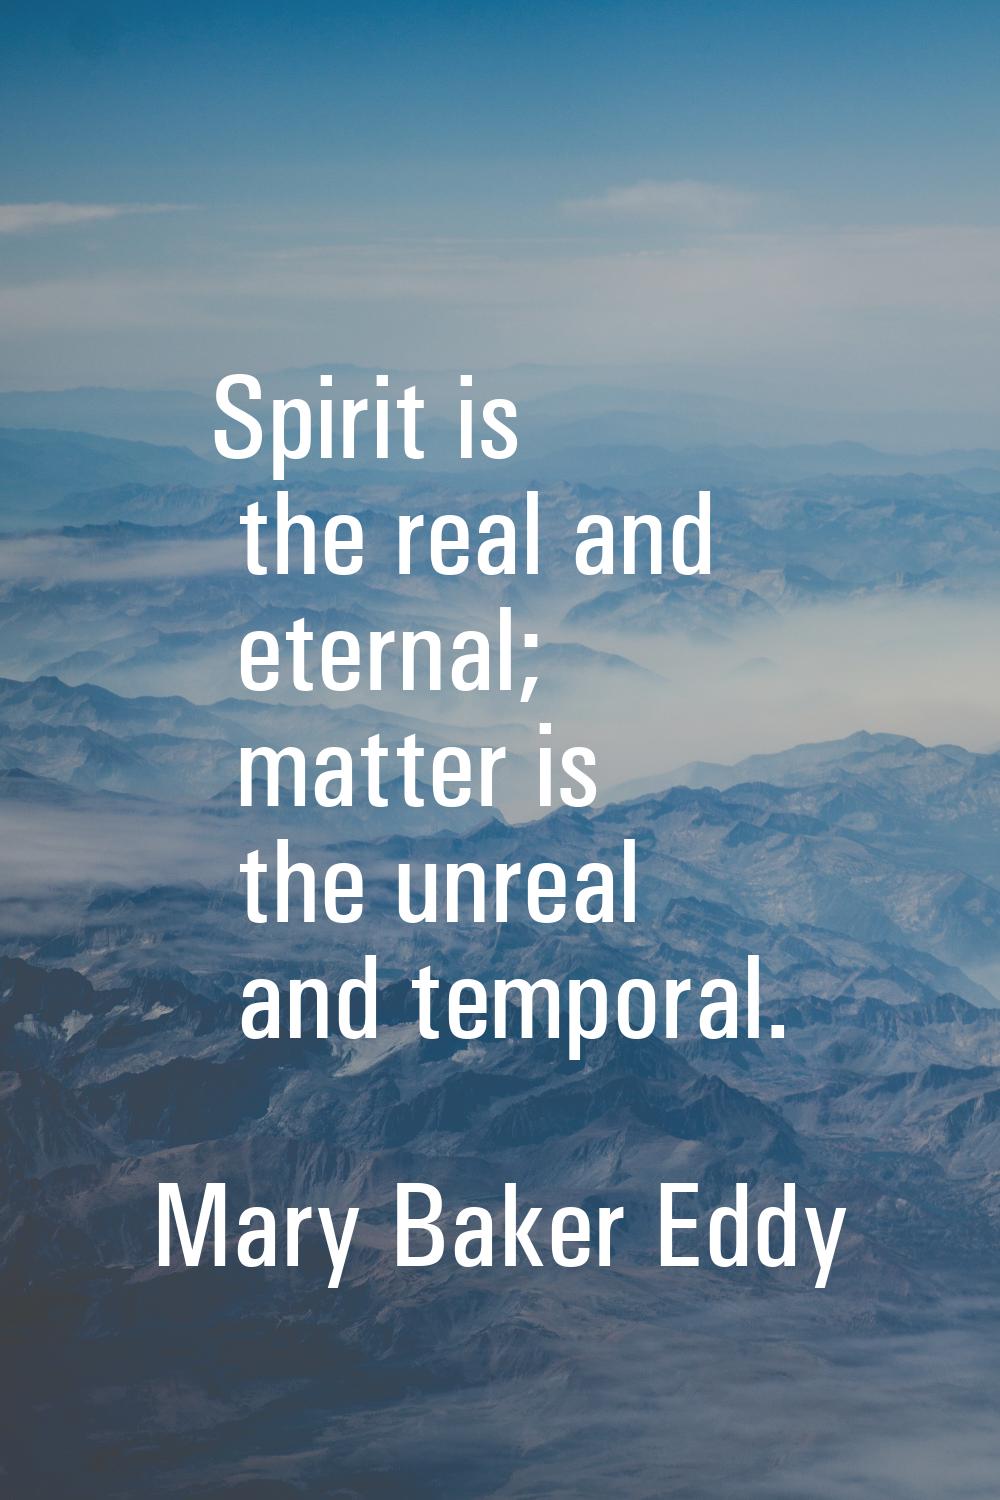 Spirit is the real and eternal; matter is the unreal and temporal.